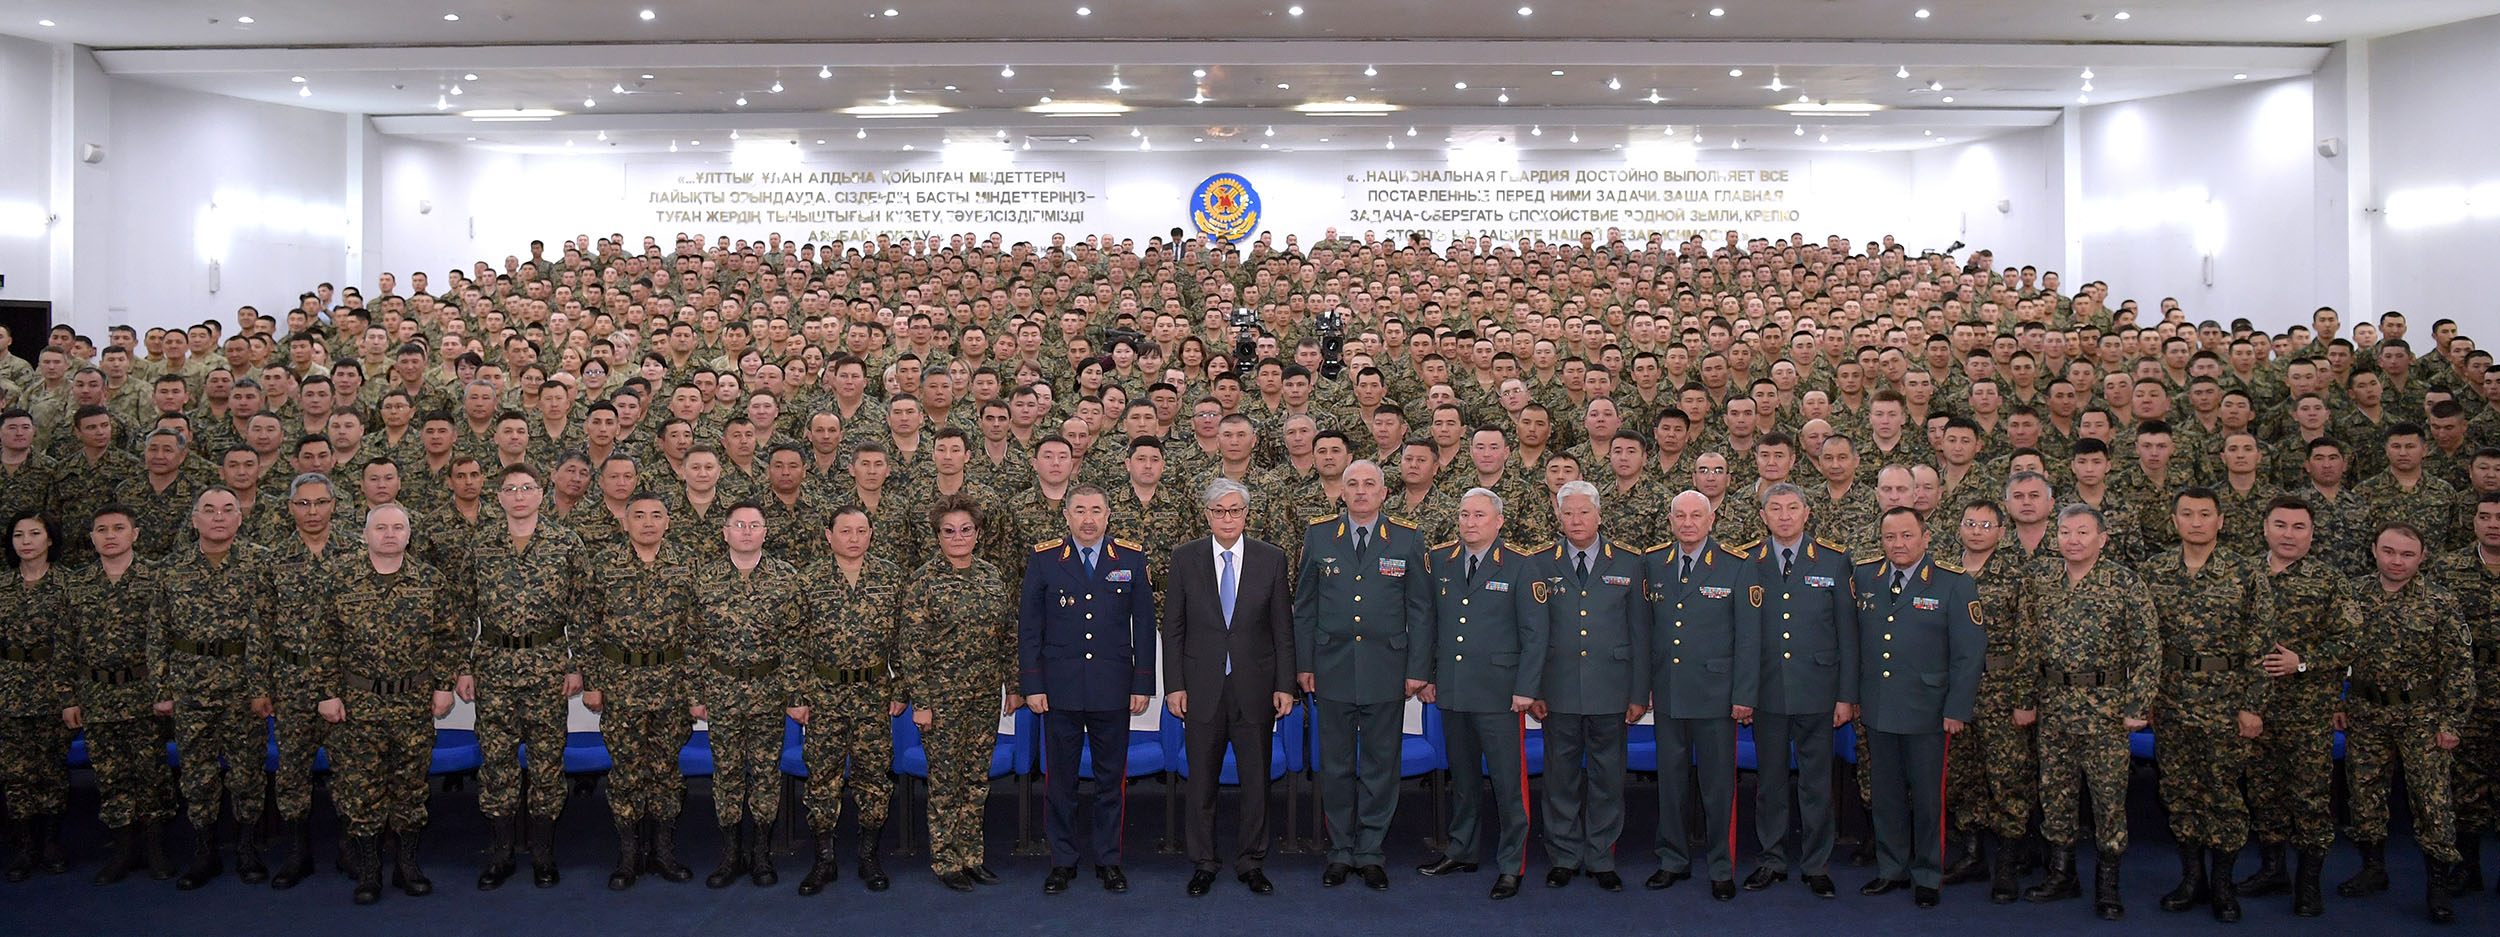 Head of State Kassym-Jomart Tokayev visits Military Unit of the National Guard